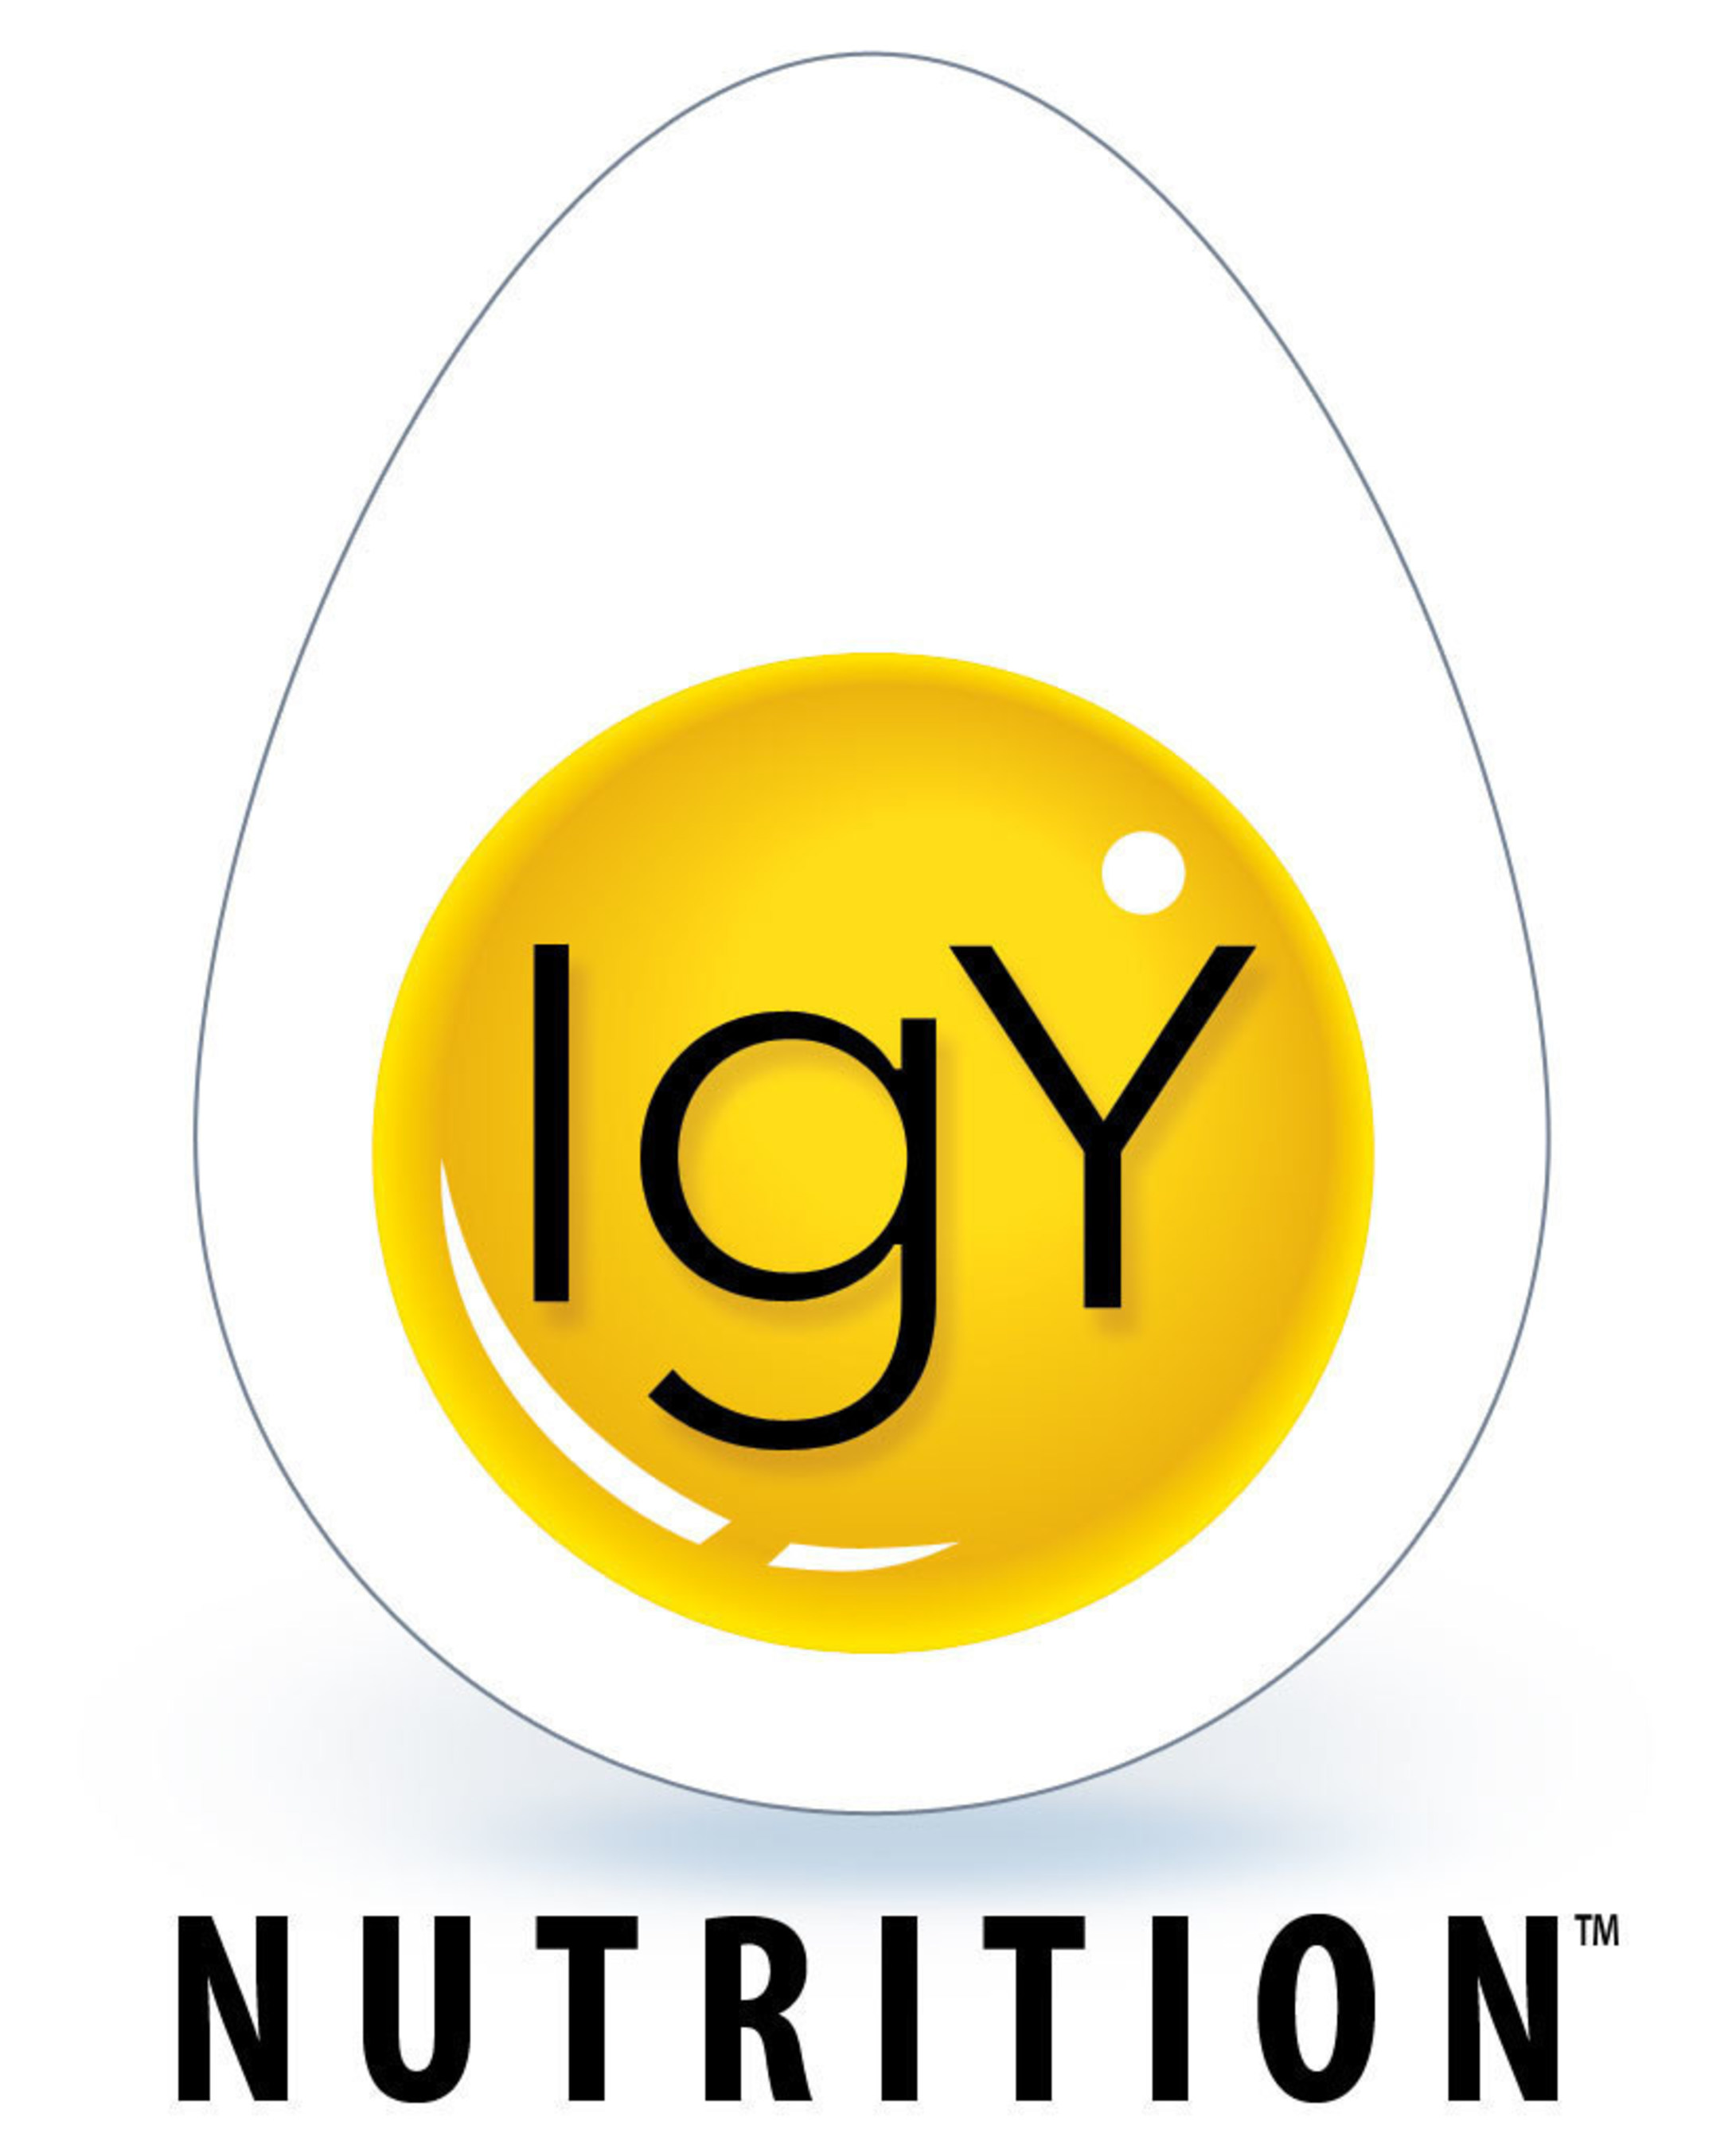 IgY Nutrition is the foremost authority on the development and production of specific immunity supplements. Our patented processes capture the capabilities of IgY to deliver targeted immune support to the digestive system for improved gastrointestinal and immune function. We produce IgY Max, a unique supplement which supports the body's natural detoxification process to reduce bacterial competition in the gut and promote the growth of pre-existing beneficial bacteria.